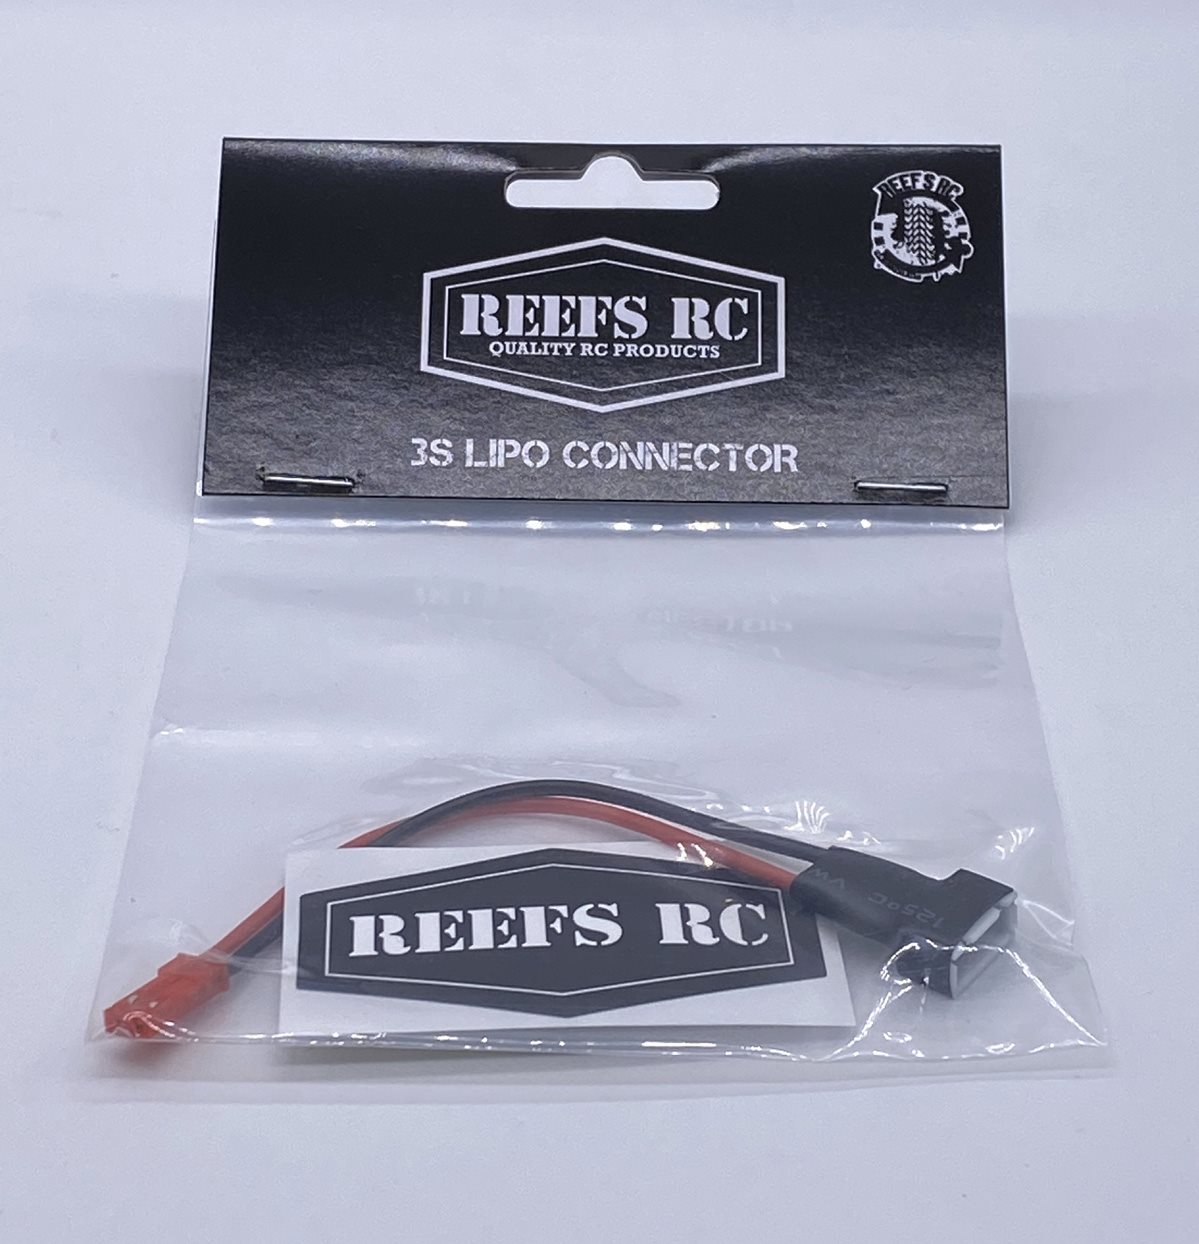 Reefs RC 3S Lipo Connector